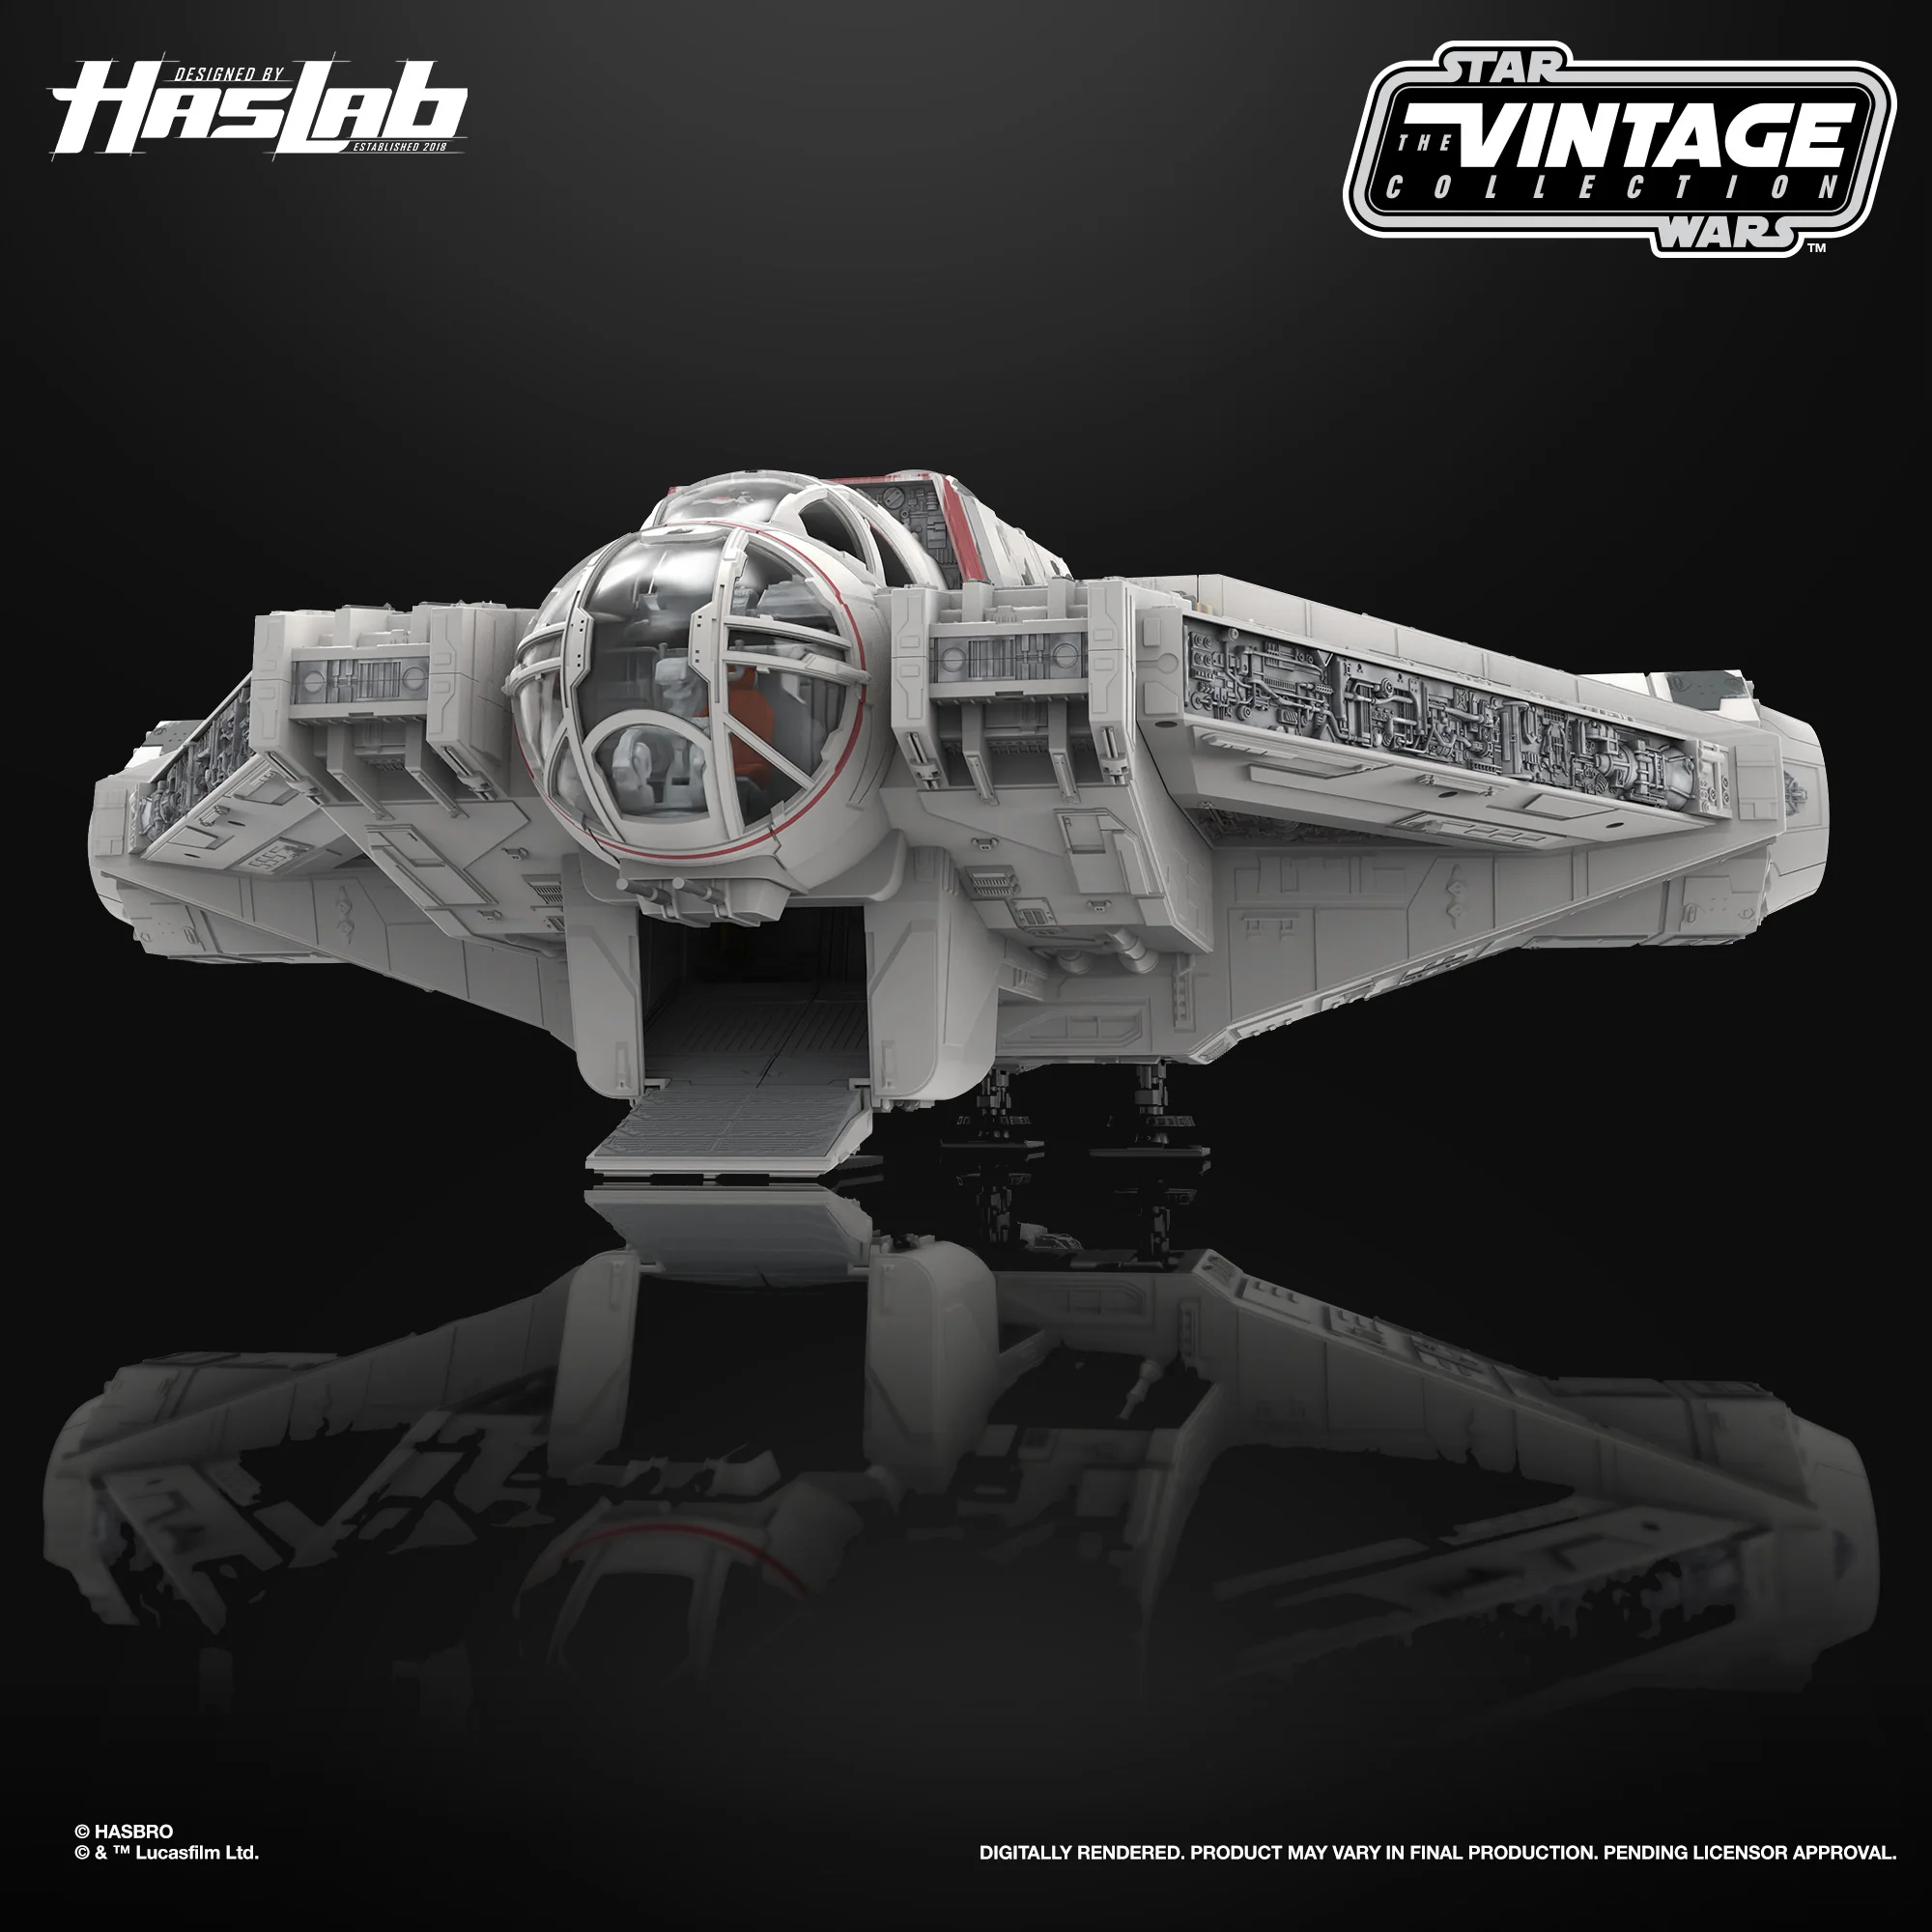 Star Wars: HasLab Vintage Collection Ghost funds in three days